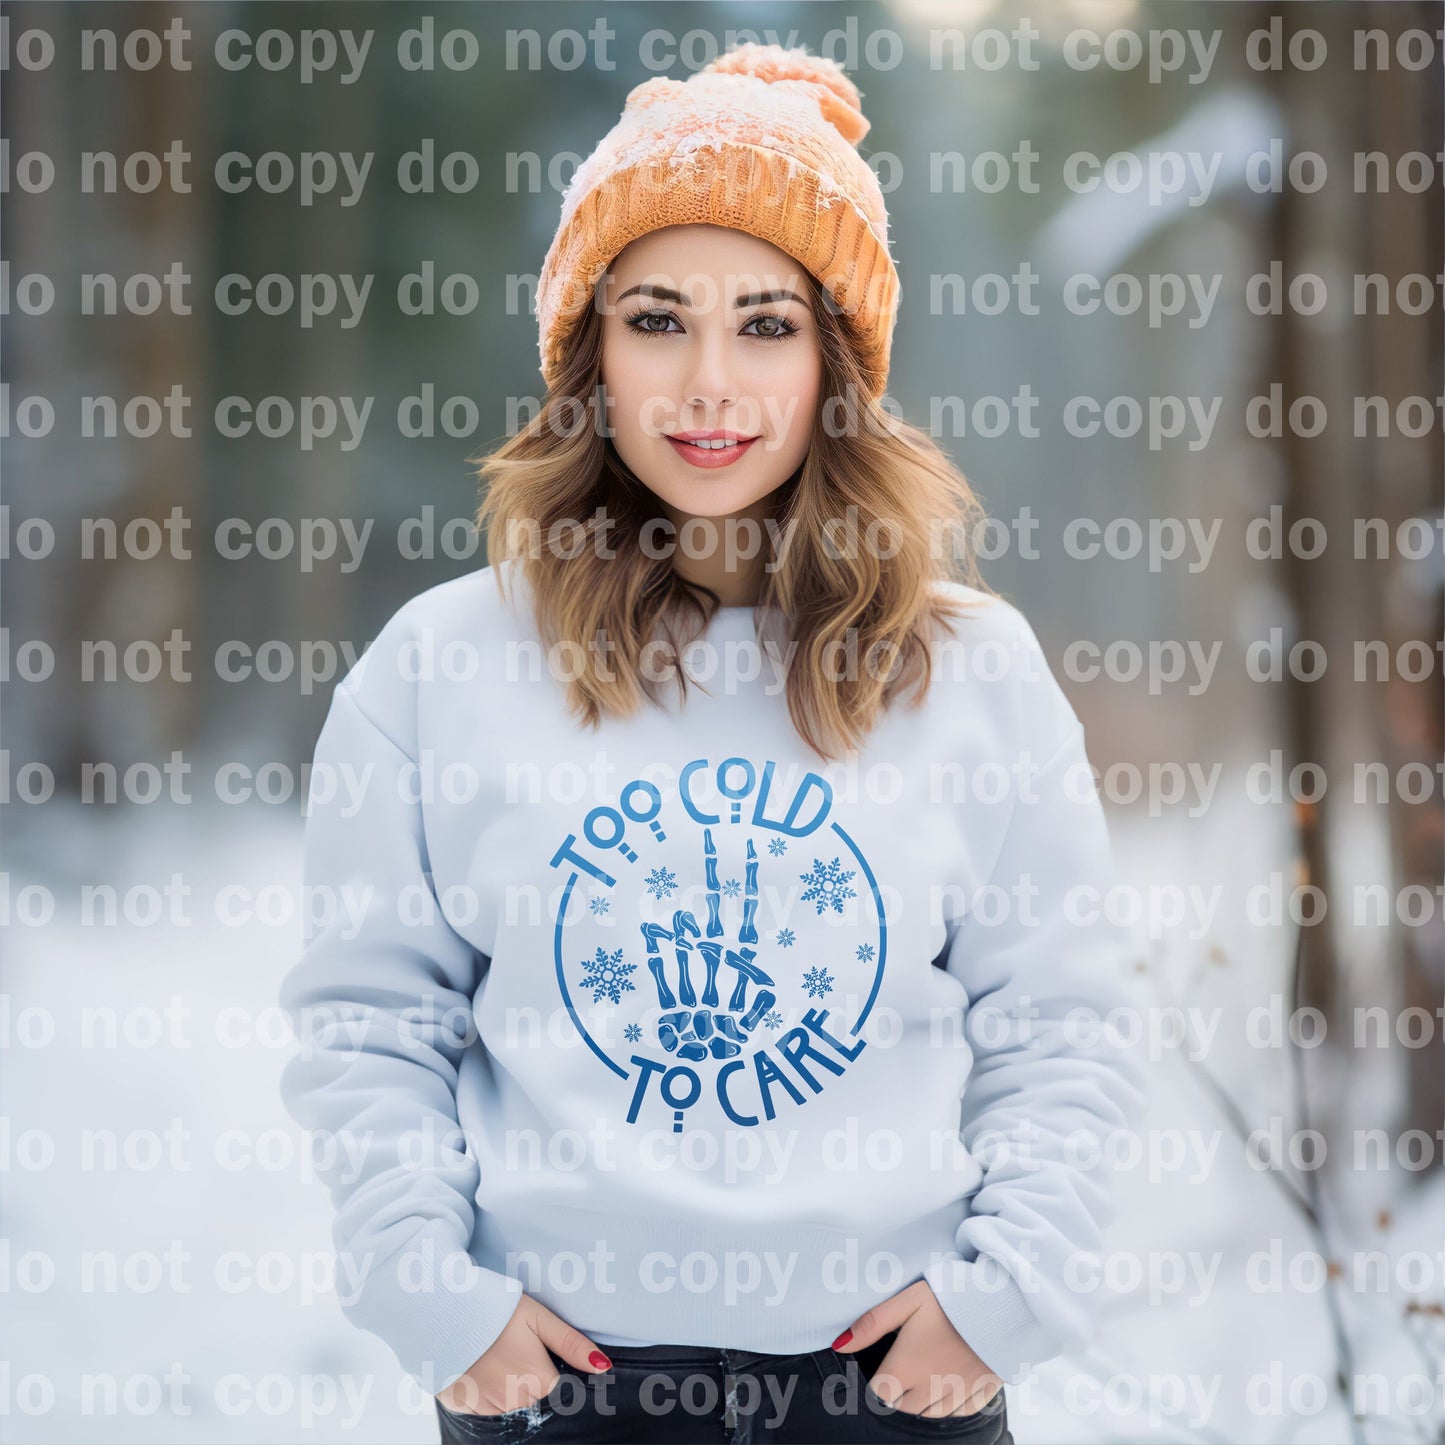 Too Cold To Care Blue Distressed/Non Distressed with Pocket Option Dream Print or Sublimation Print